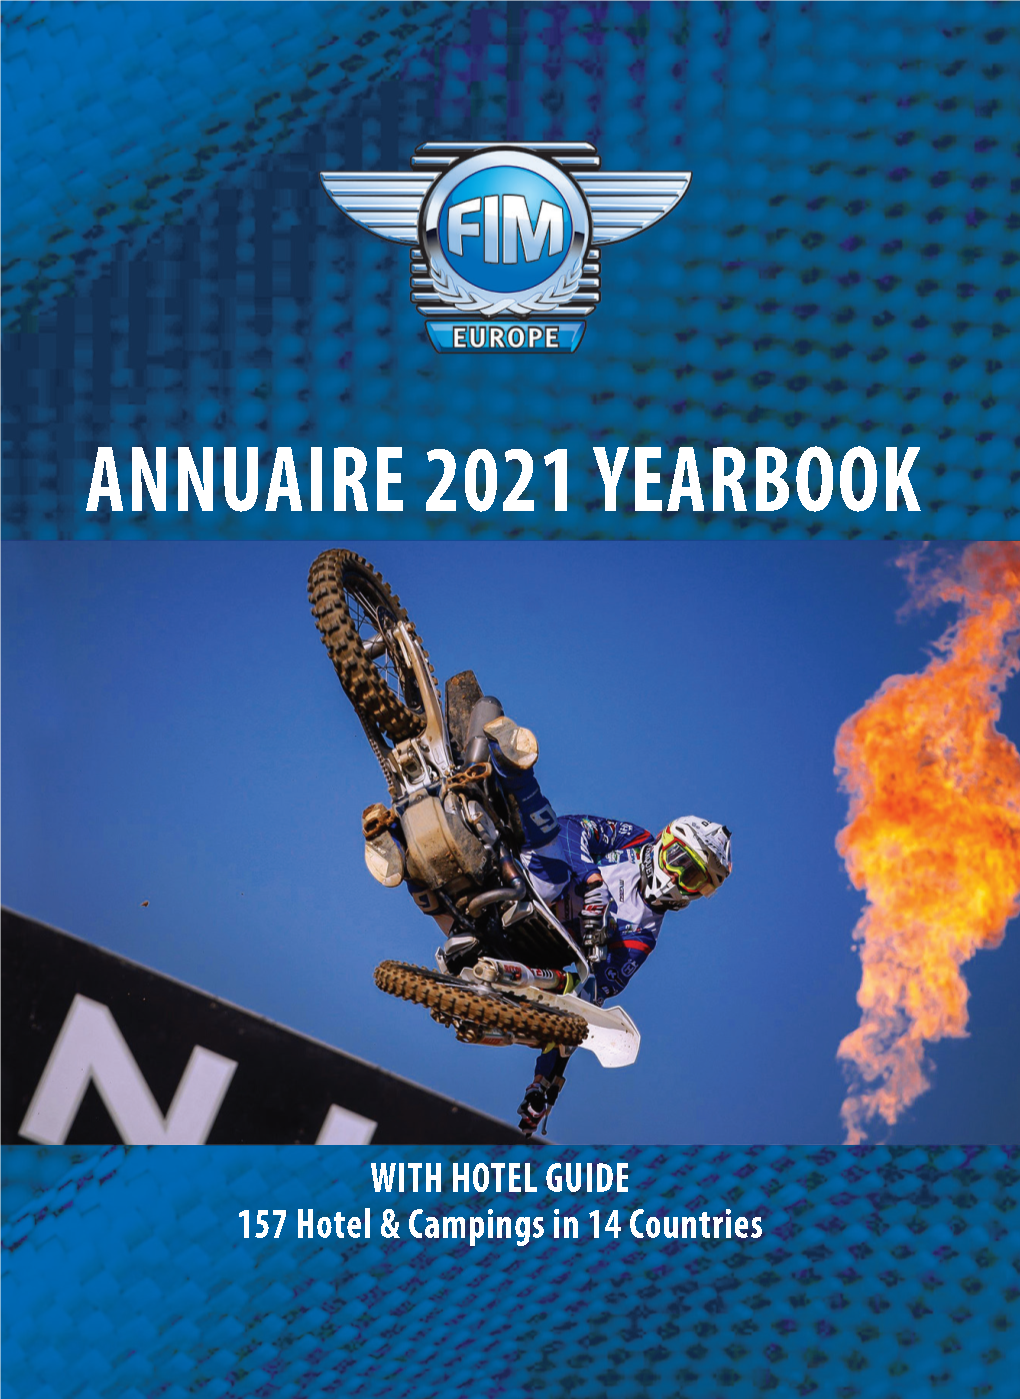 Download Here the 2021 FIM Europe Yearbook